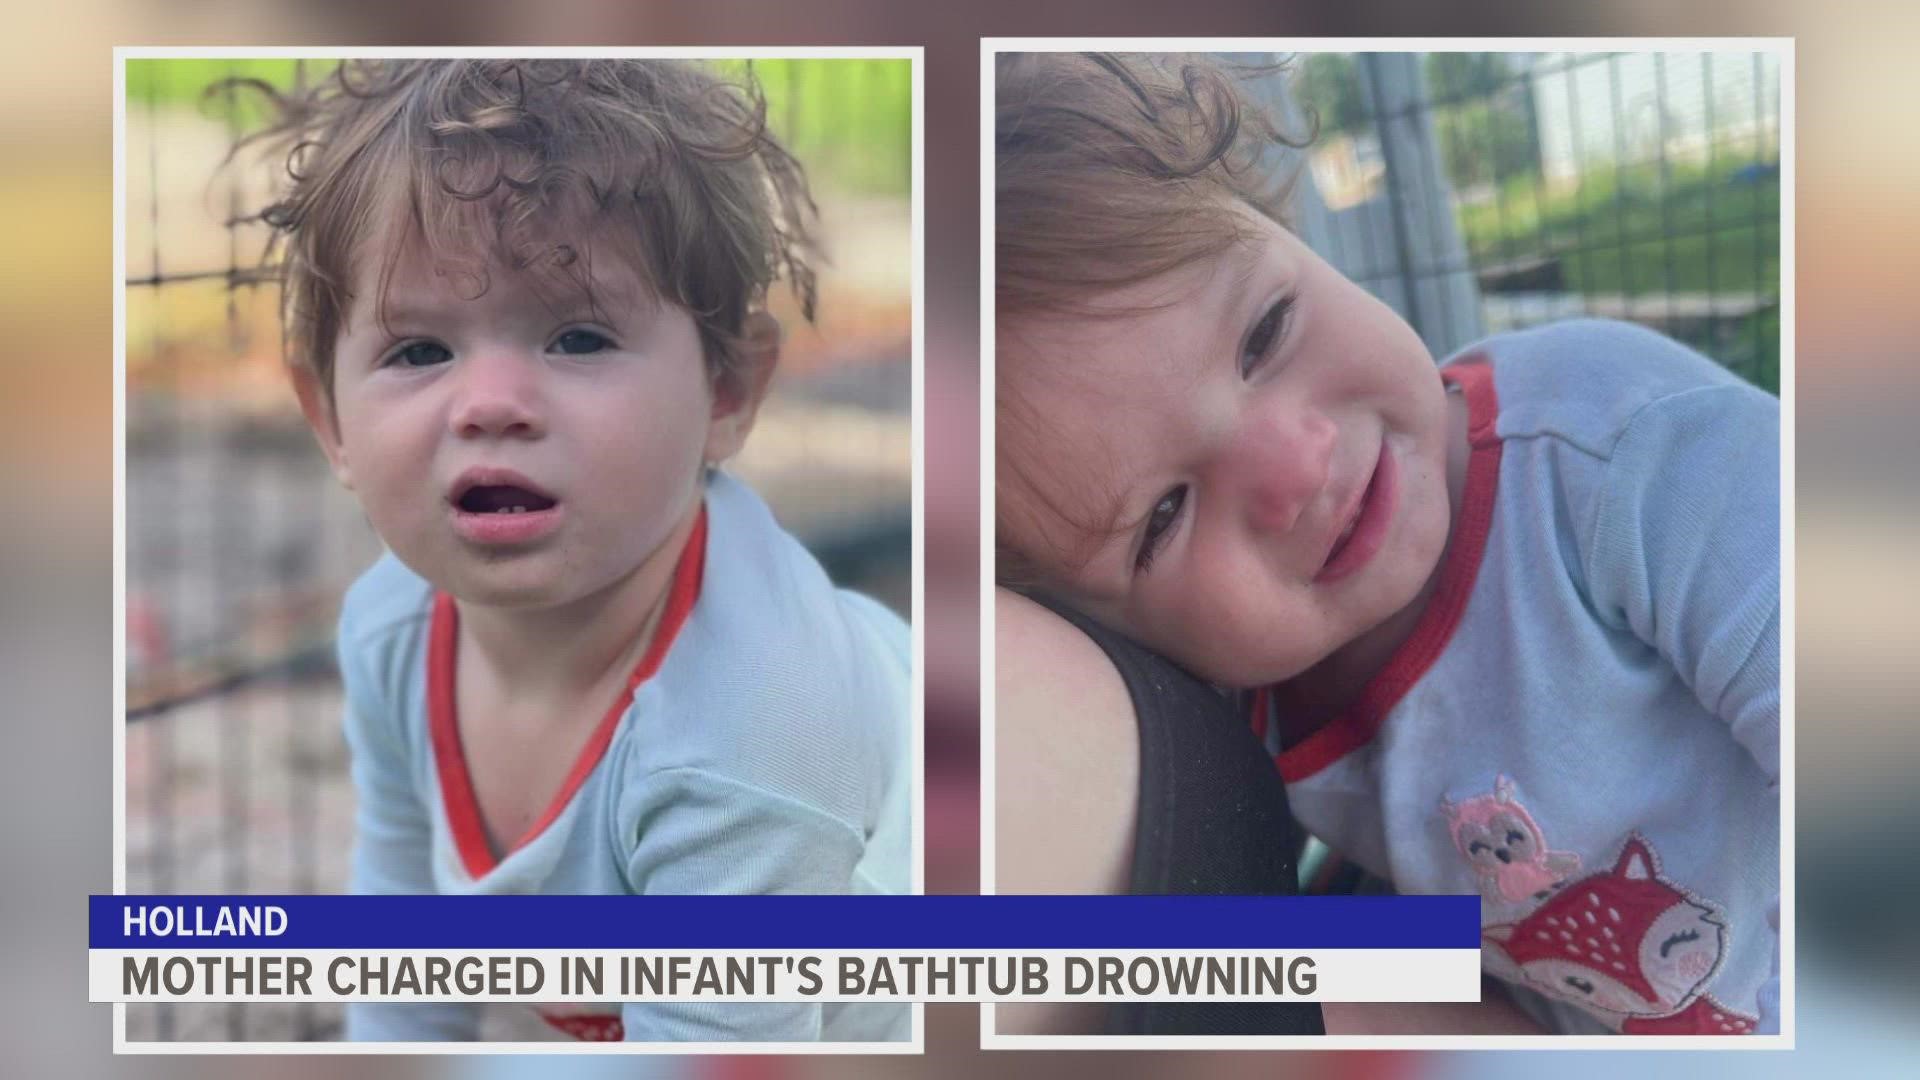 Two weeks after the infant's near-drowning, the child died at the hospital in August. The Ottawa Co. Prosecutor authorized charges against the mother this week.